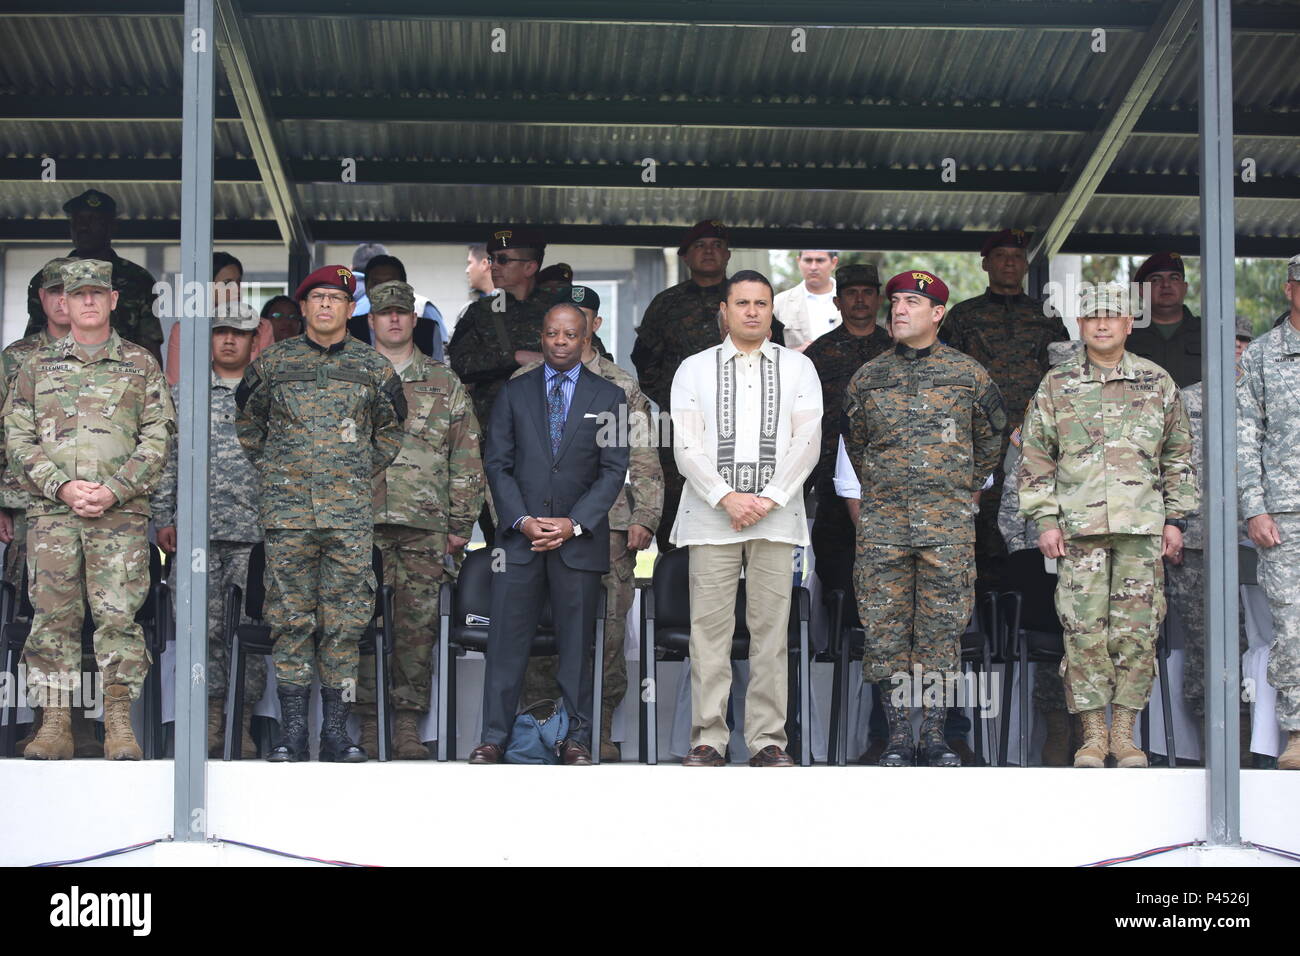 U.S. Army Brigadier Generals Keith Klemmer (far left) and James P. Wong (far right) await the beginning of the ceremony with Todd Robinson Ambassador of Guatemala, Carlos Raul Morales Moscoso, Constitutional President of the Republic and Commanding General of the Army of Guatemala, and Brigadier General Juan Manuel Perez Ramirez and Division General Williams Agberto Mansilla Fernandez in San Marcos, Guatemala on June 9, 2016. Task Force Red Wolf and Army South conducts Humanitarian Civil Assistance Training to include tactical level construction project and Medical Readiness Training Exercises Stock Photo